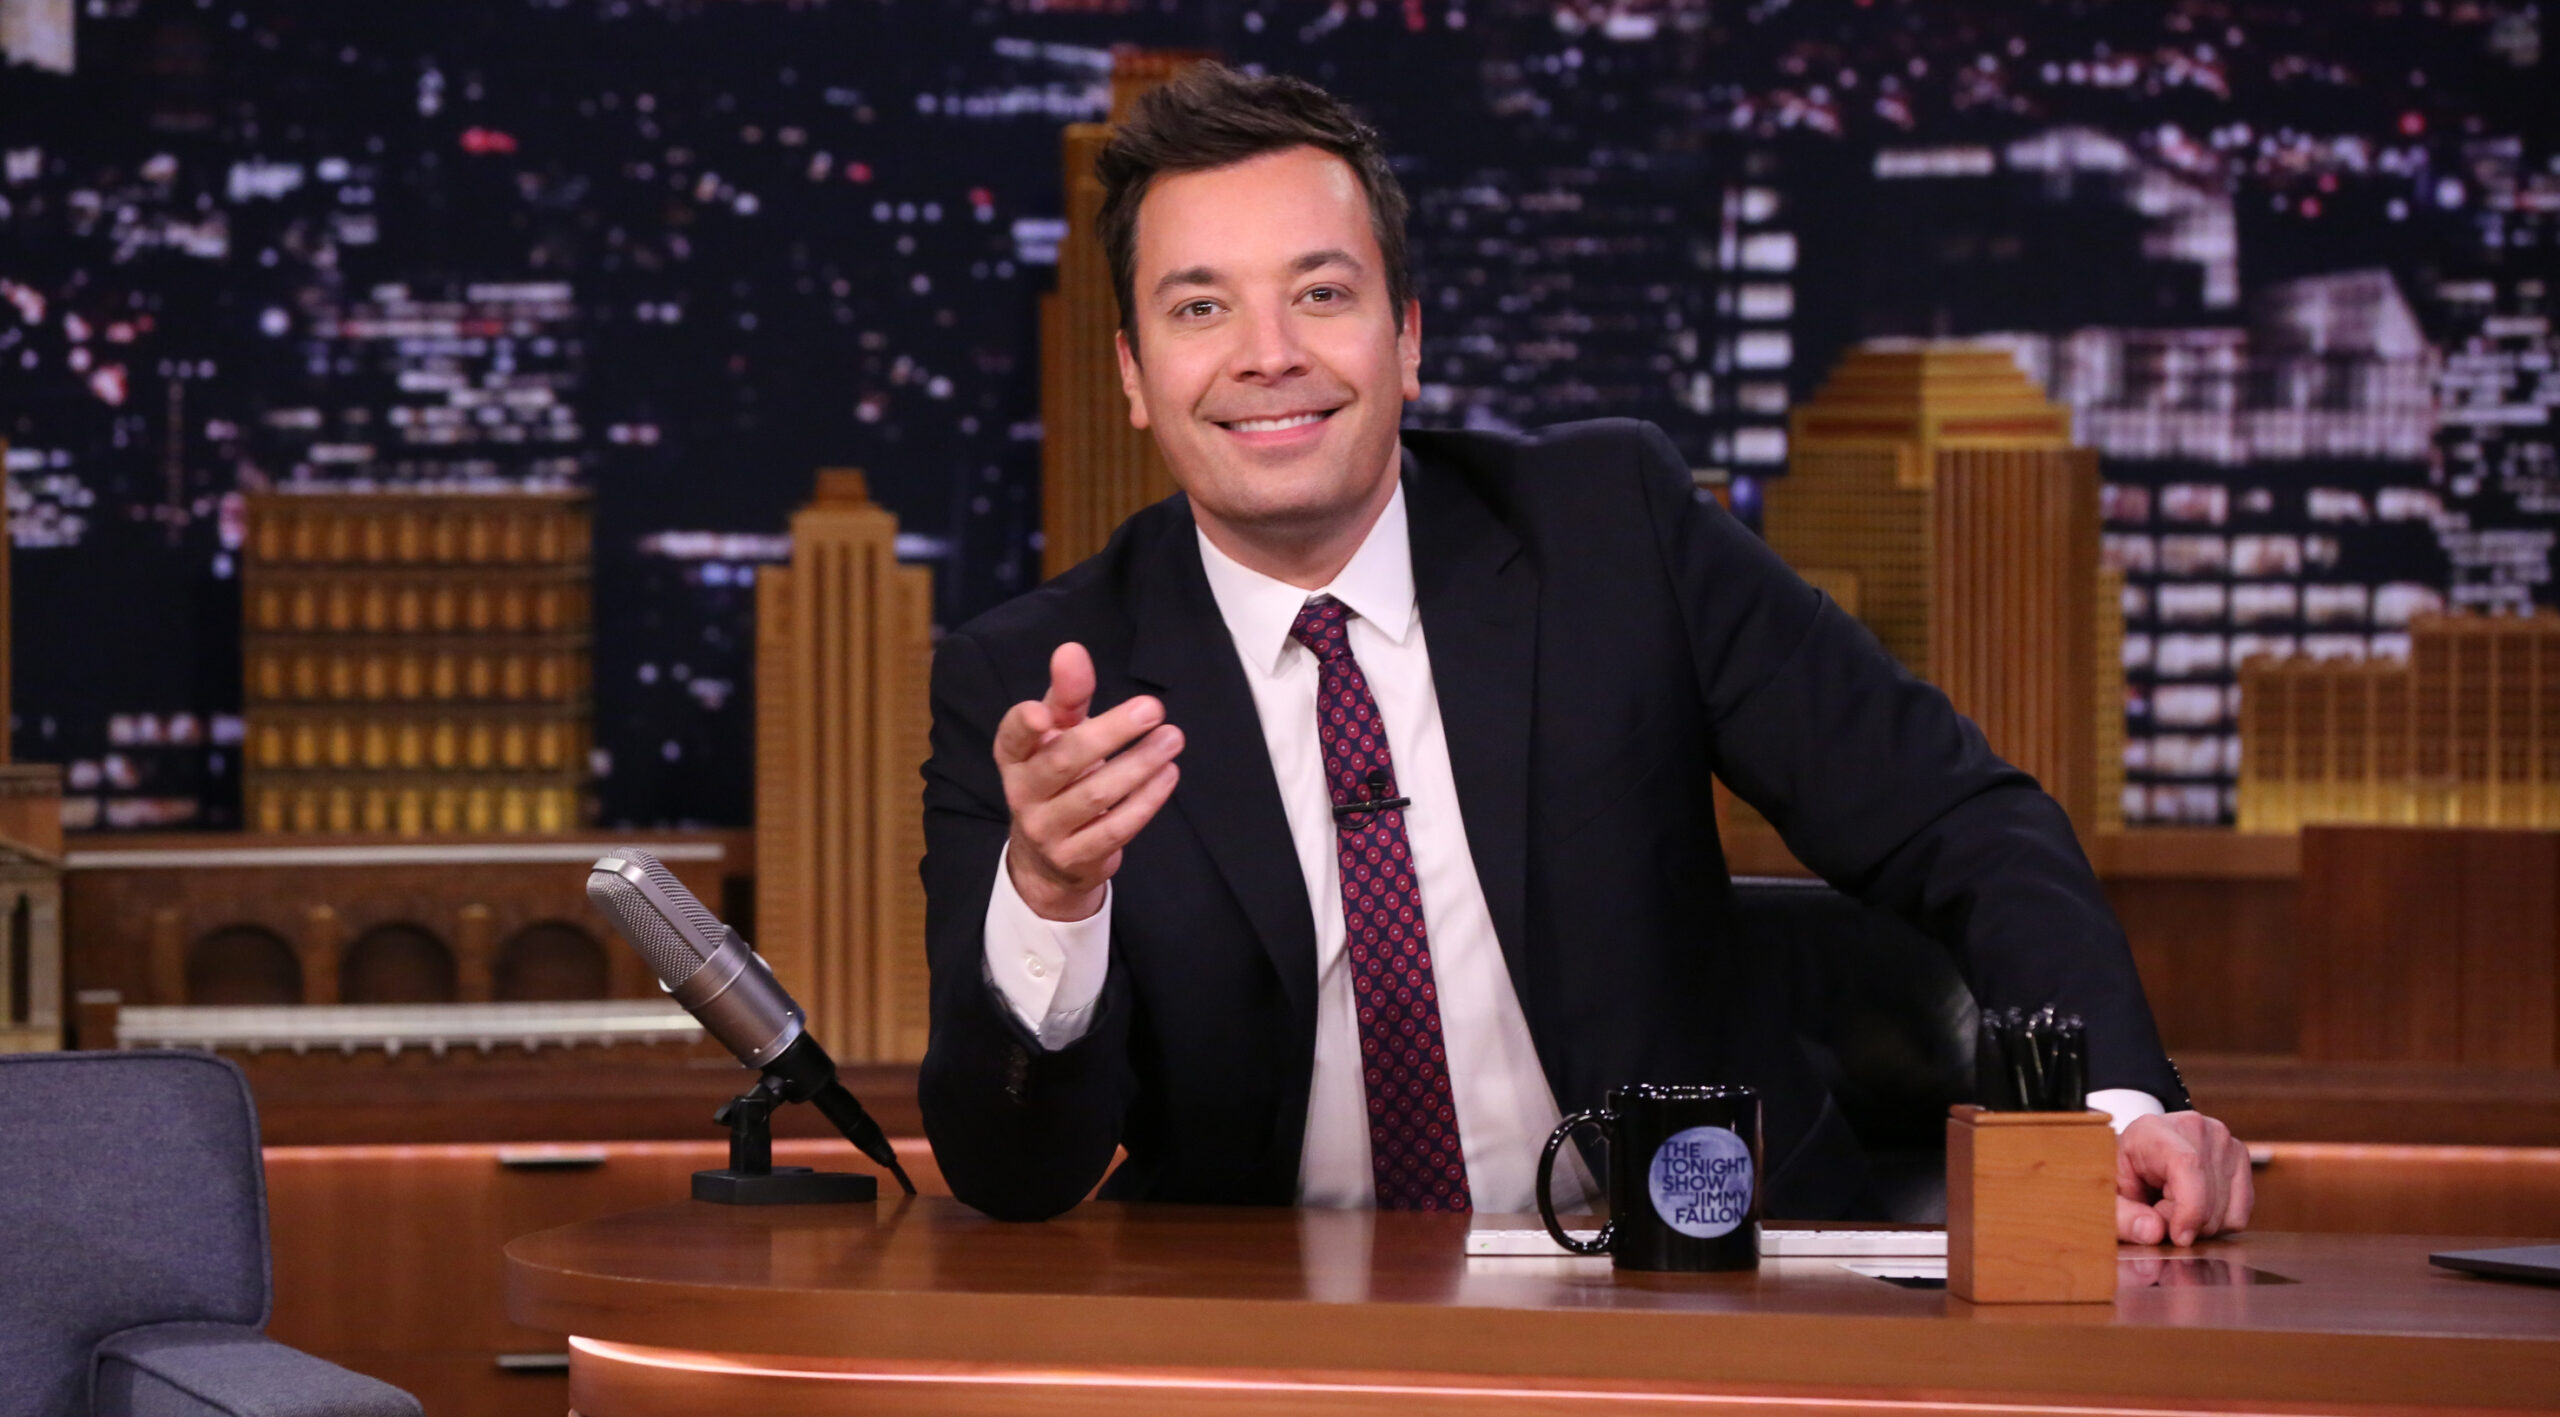 Fallon and Meyers to aid staff during writers’ strike: Report.